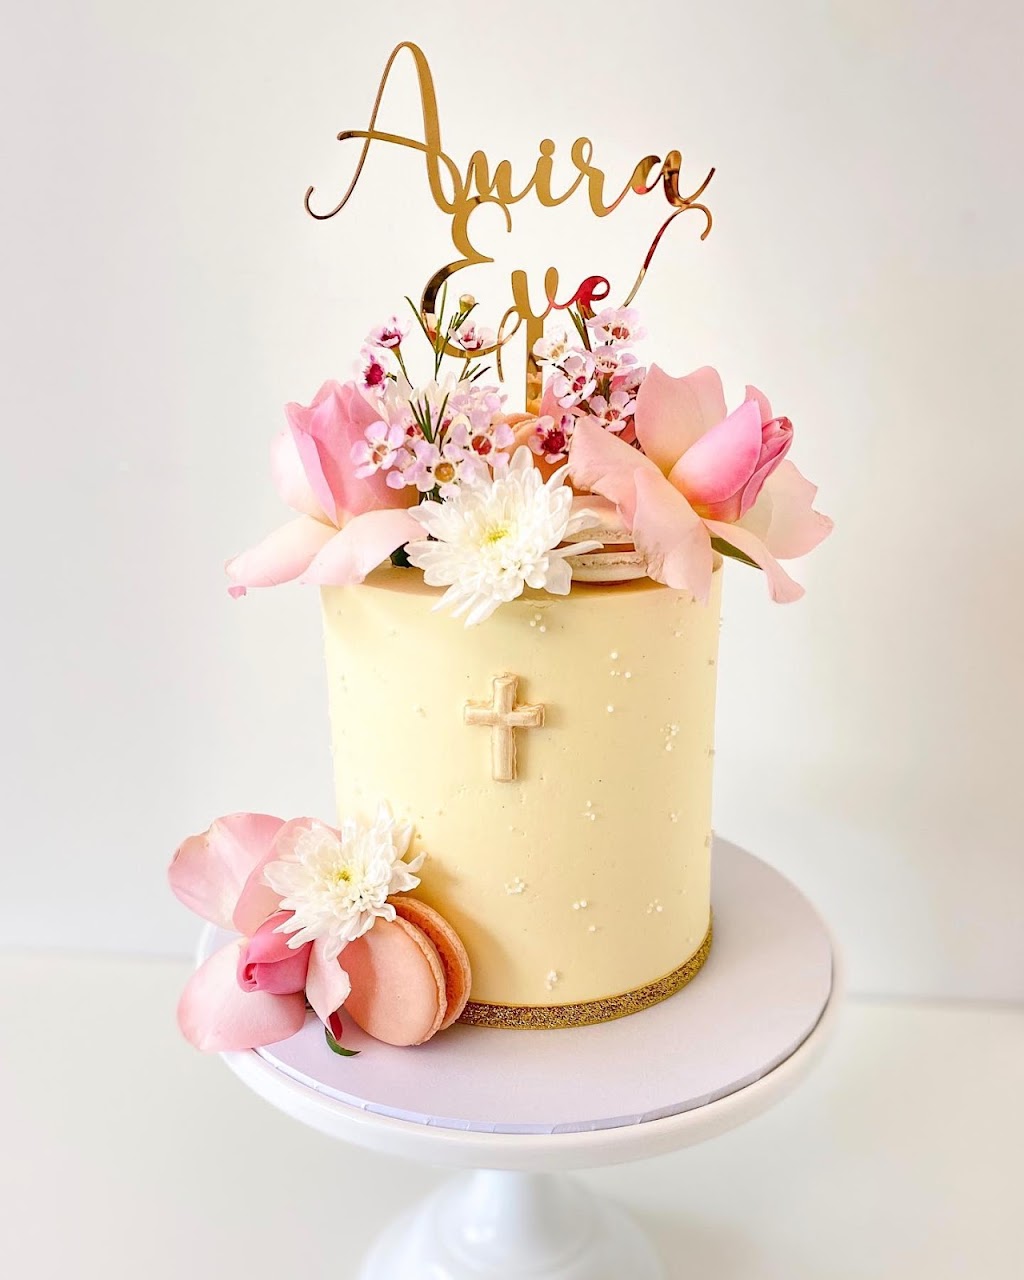 Cakes by Sarah | 7 Aviemore Dr, Bedfordale WA 6112, Australia | Phone: 0437 824 384